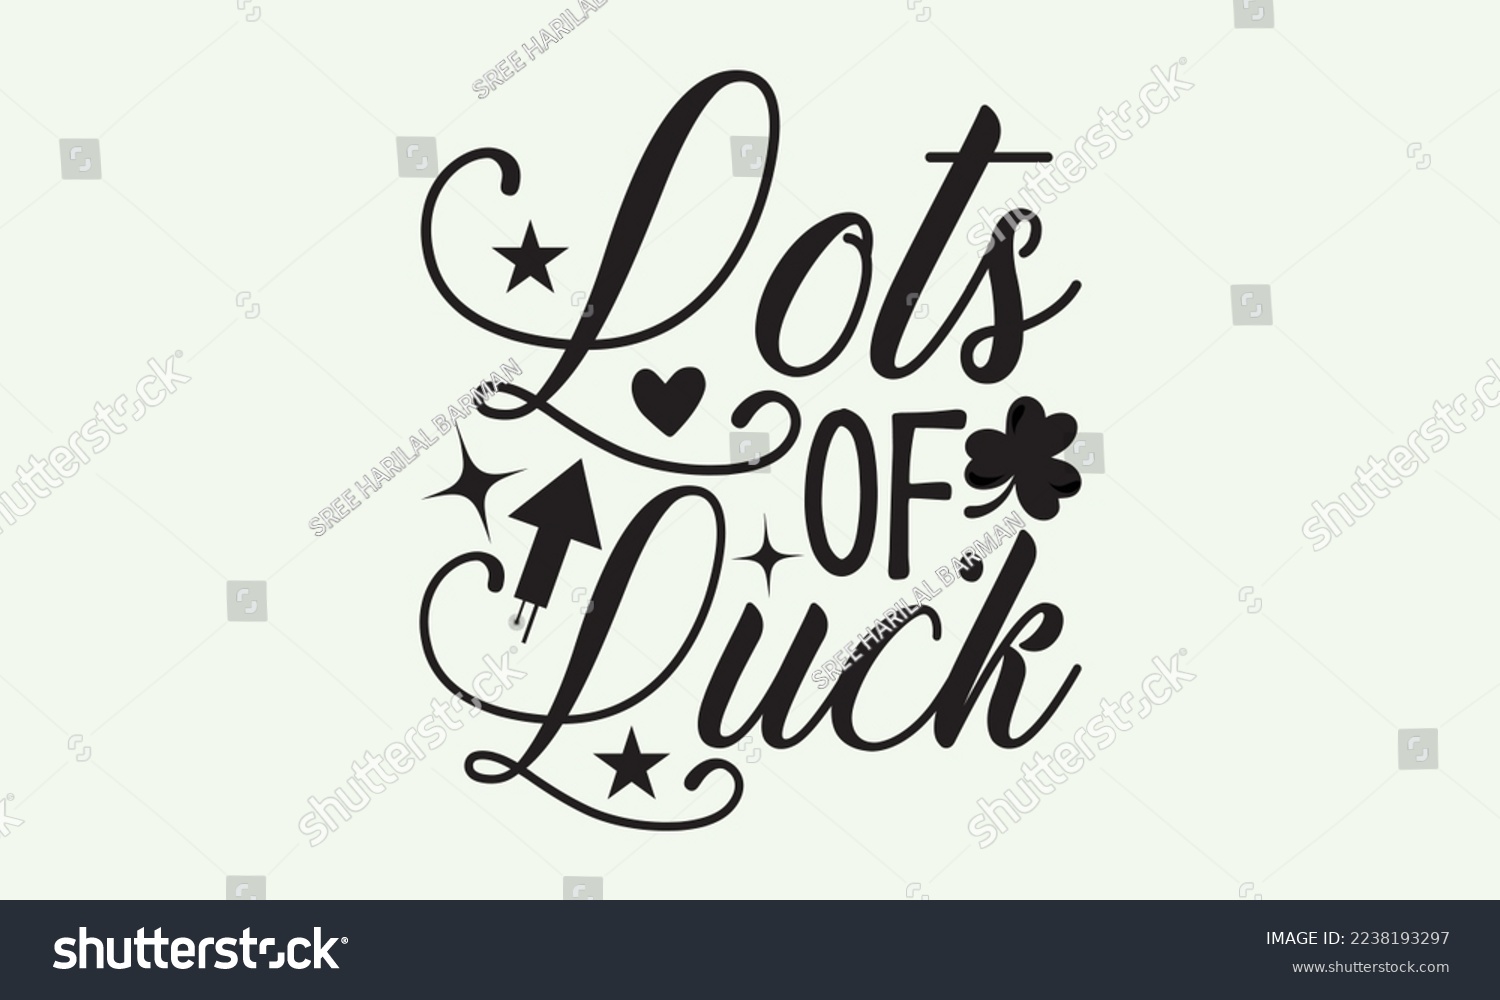 SVG of Lots of. Luck - President's day T-shirt Design, File Sports SVG Design, Sports typography t-shirt design, For stickers, Templet, mugs, etc. for Cutting, cards, and flyers. svg